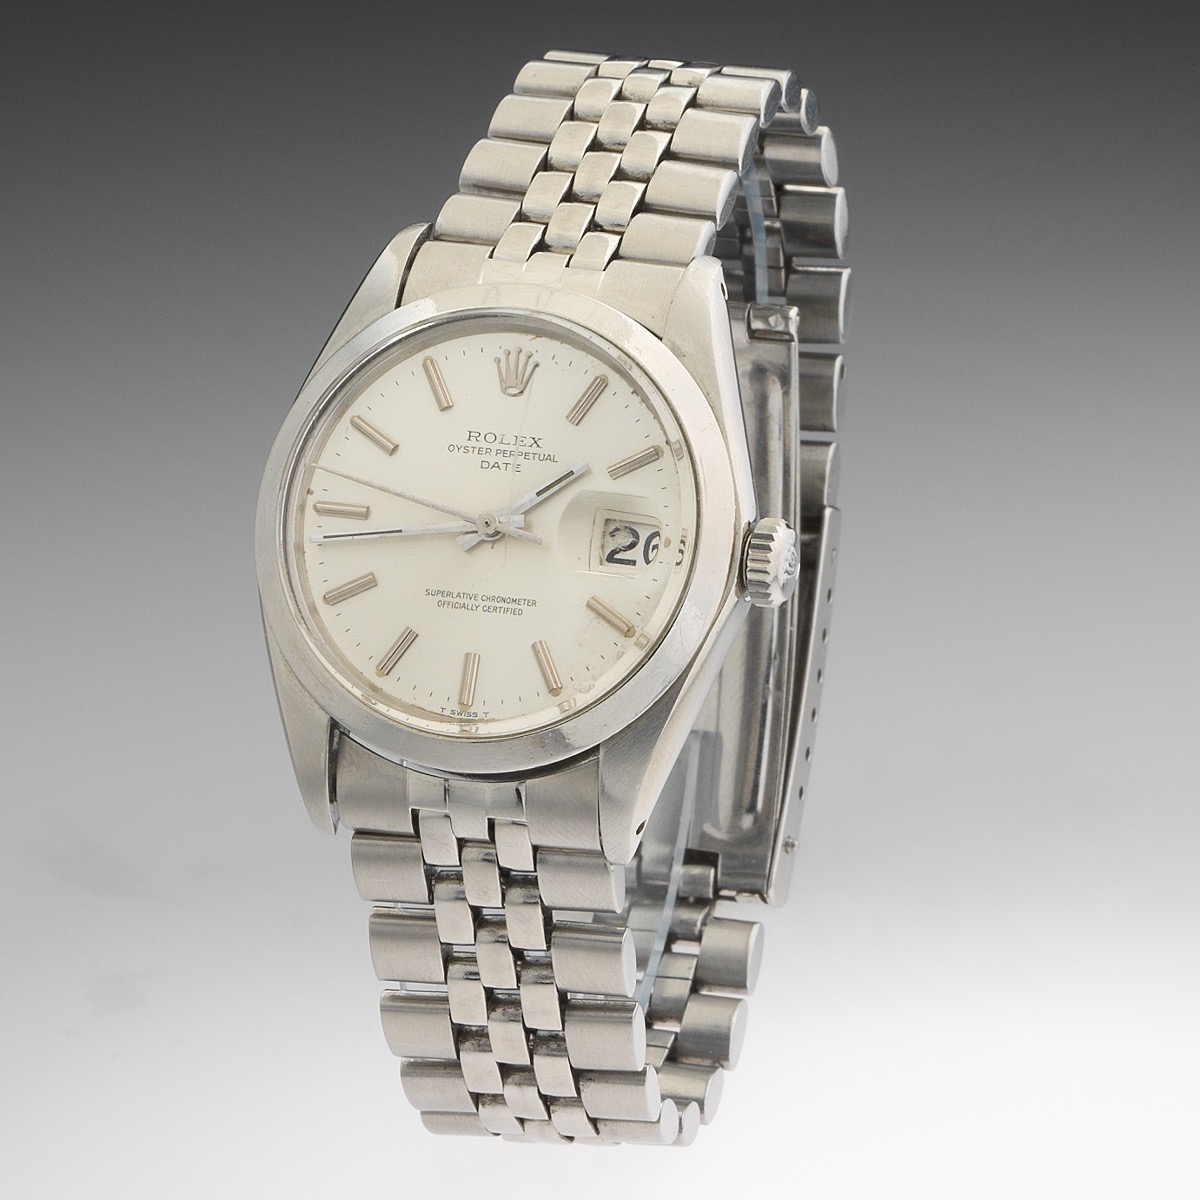 oyster perpetual date superlative chronometer officially certified